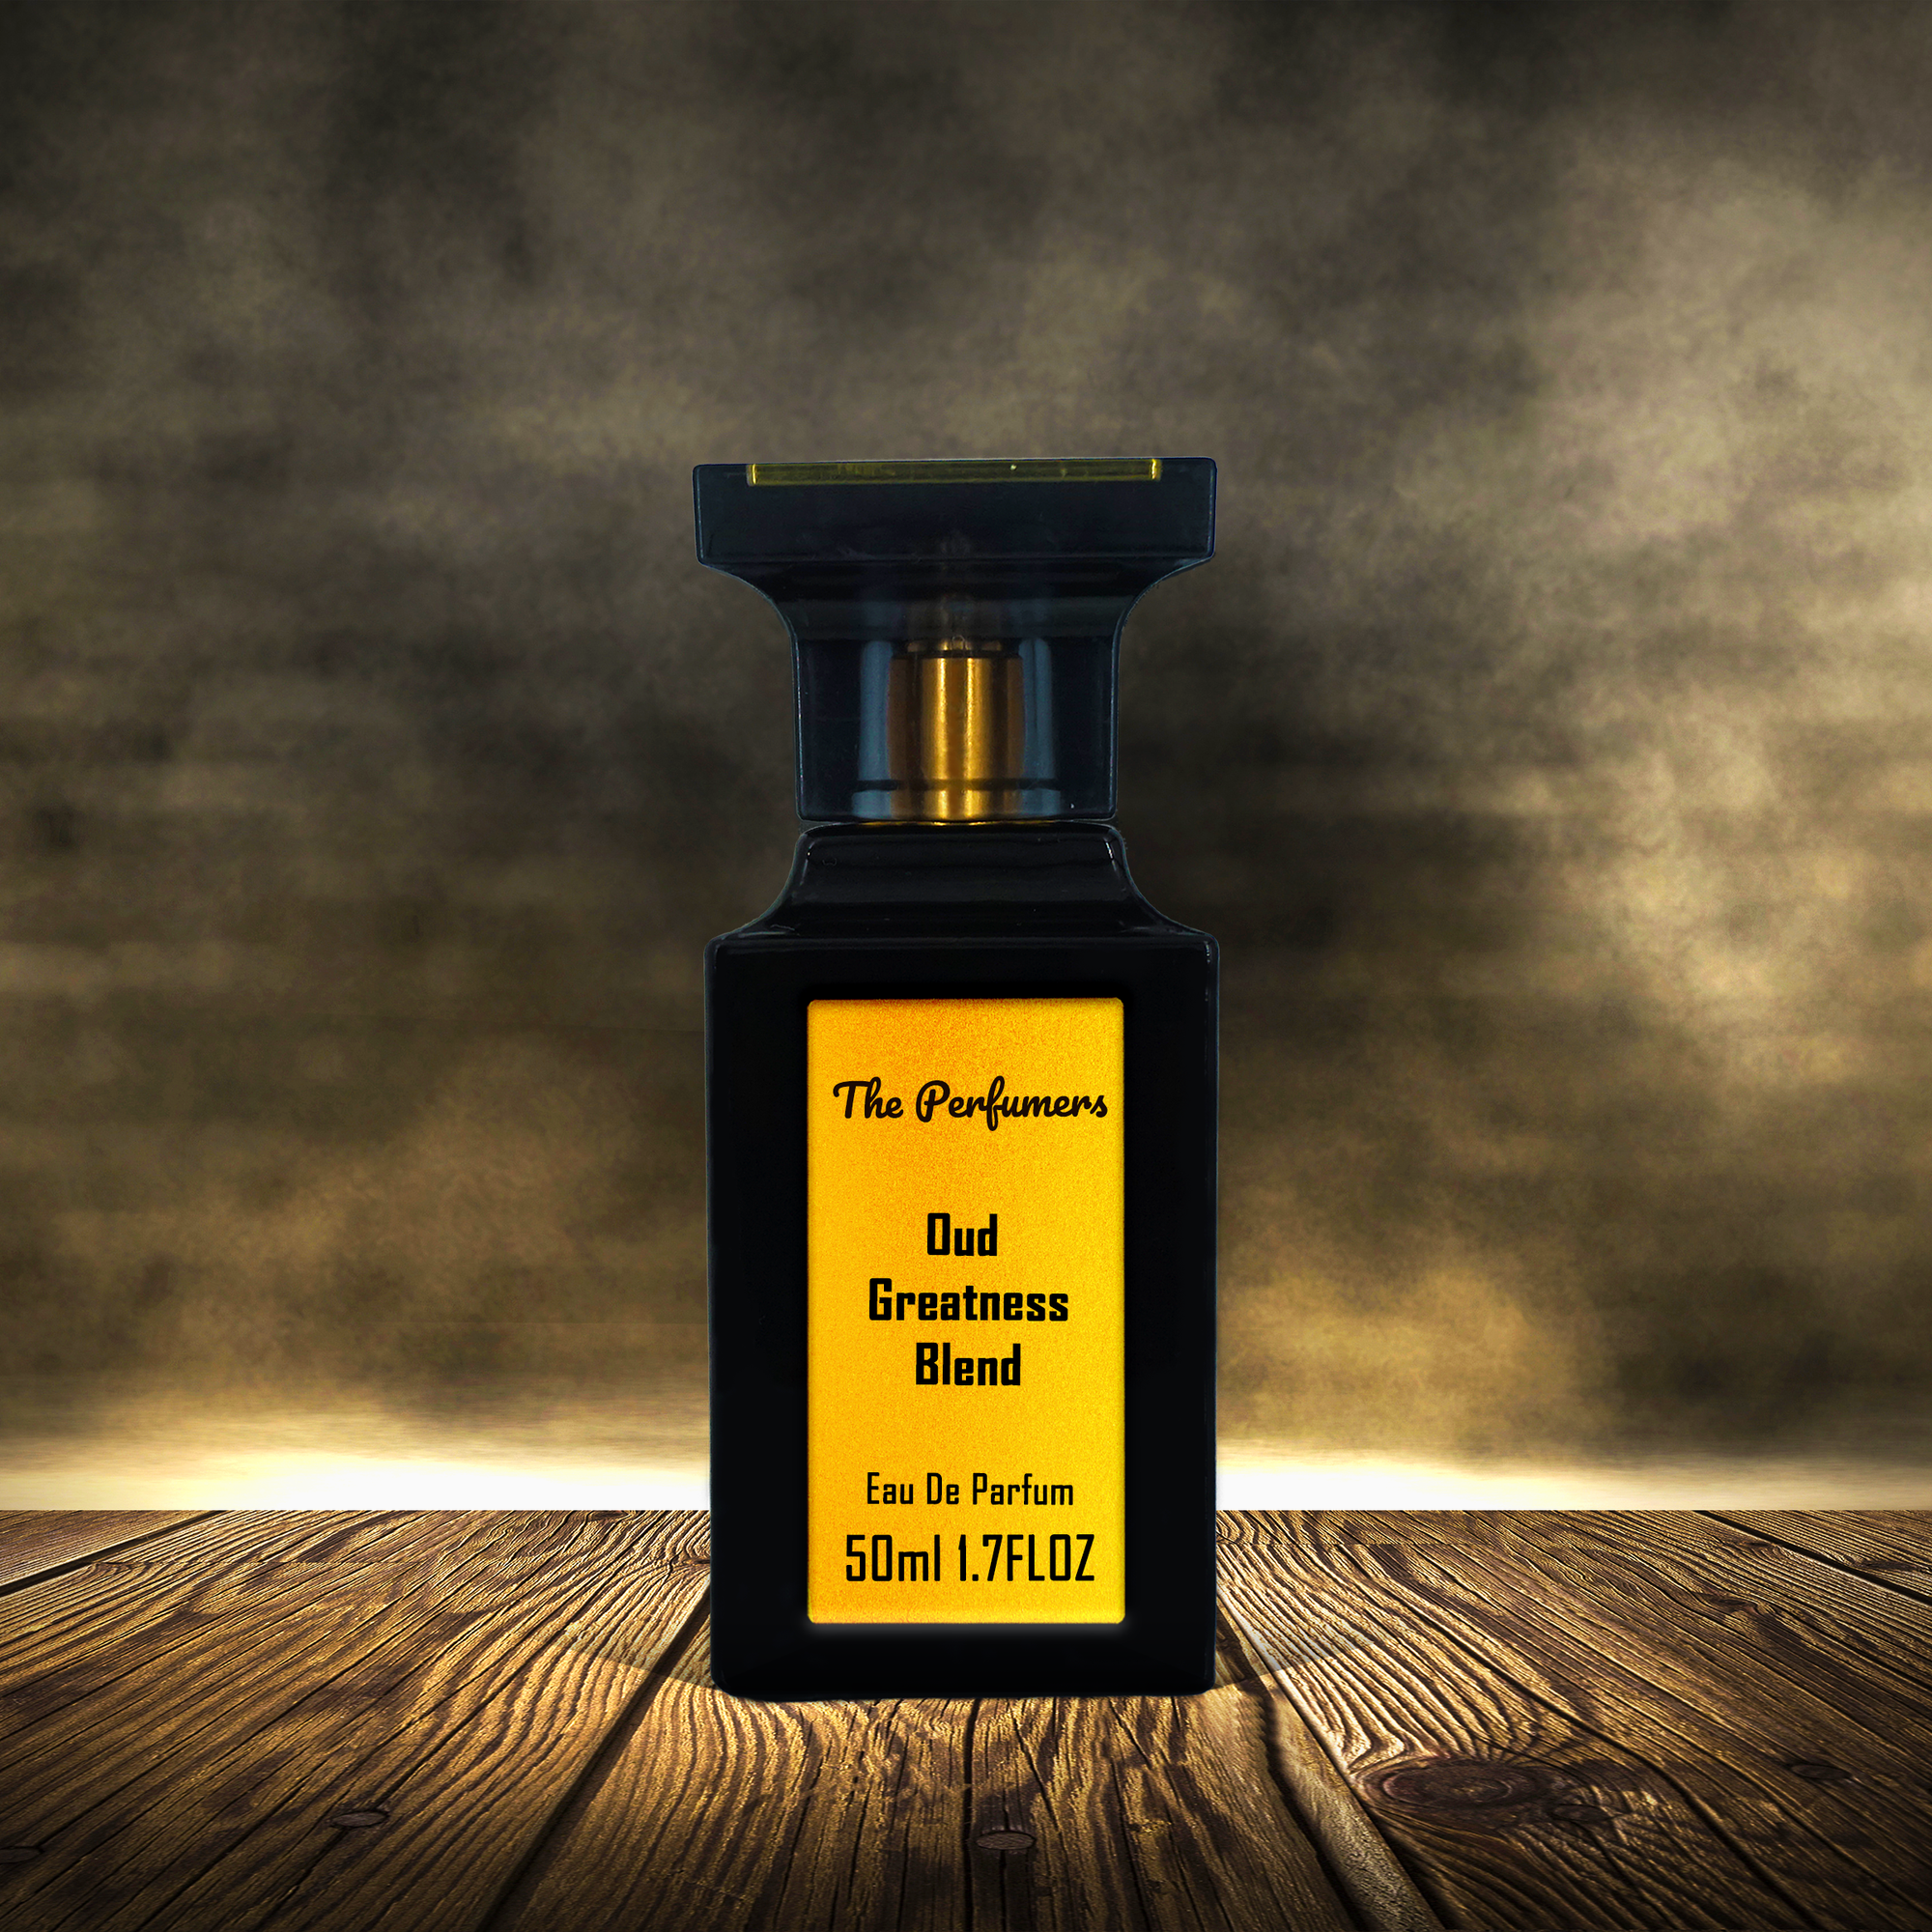 Oud Greatness Blend (Inspired by Initio)